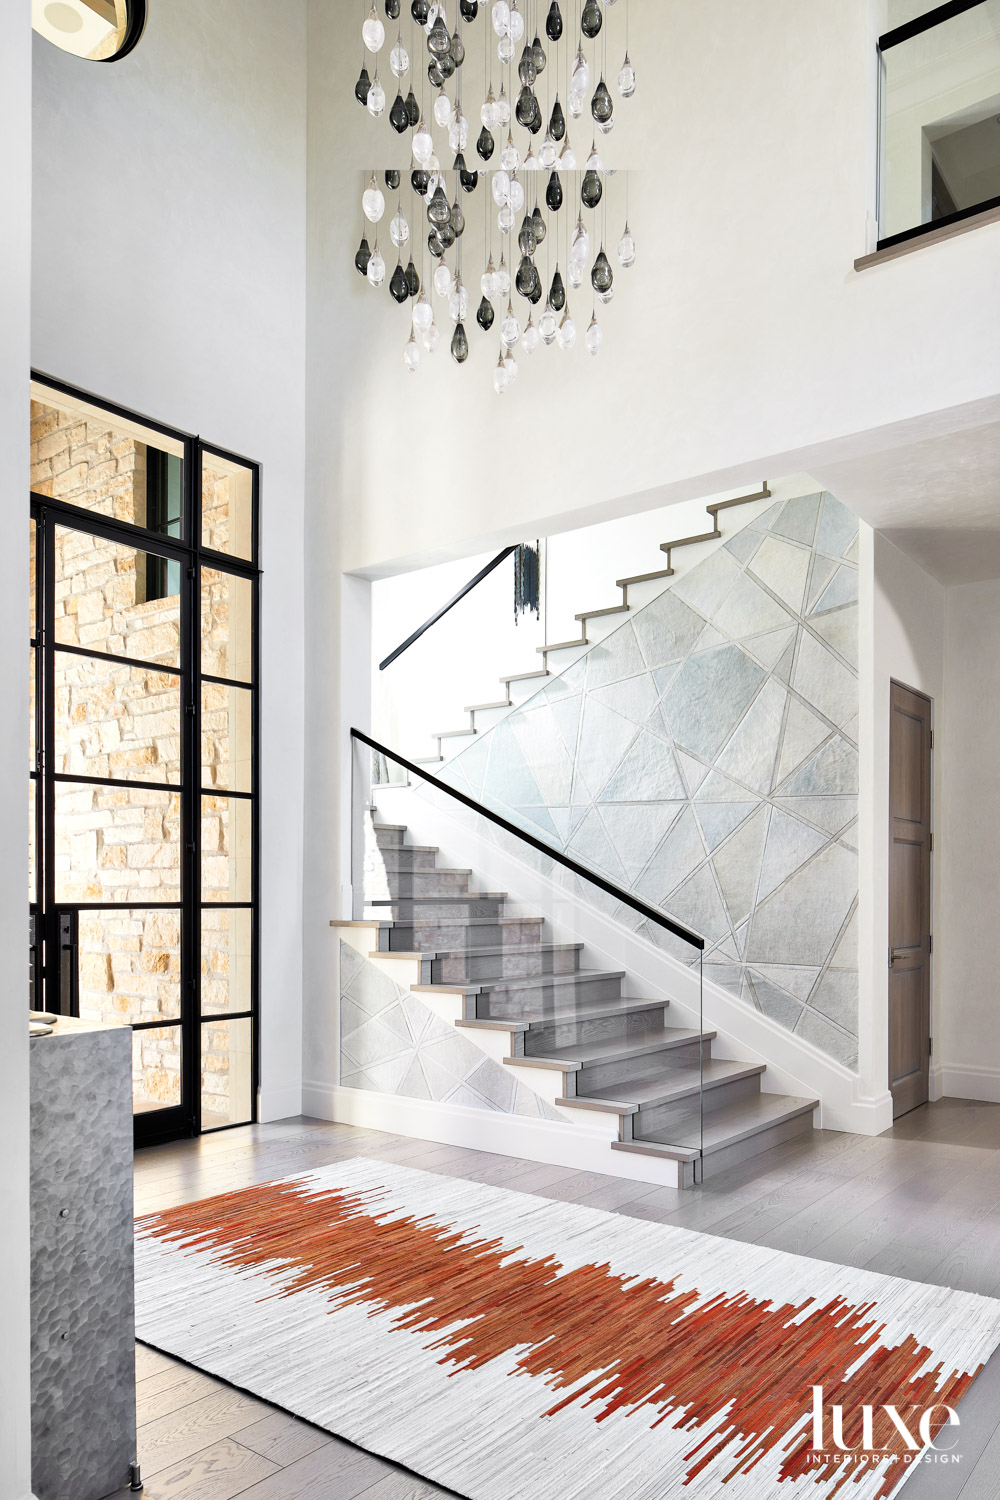 An entryway with a glass-railing...